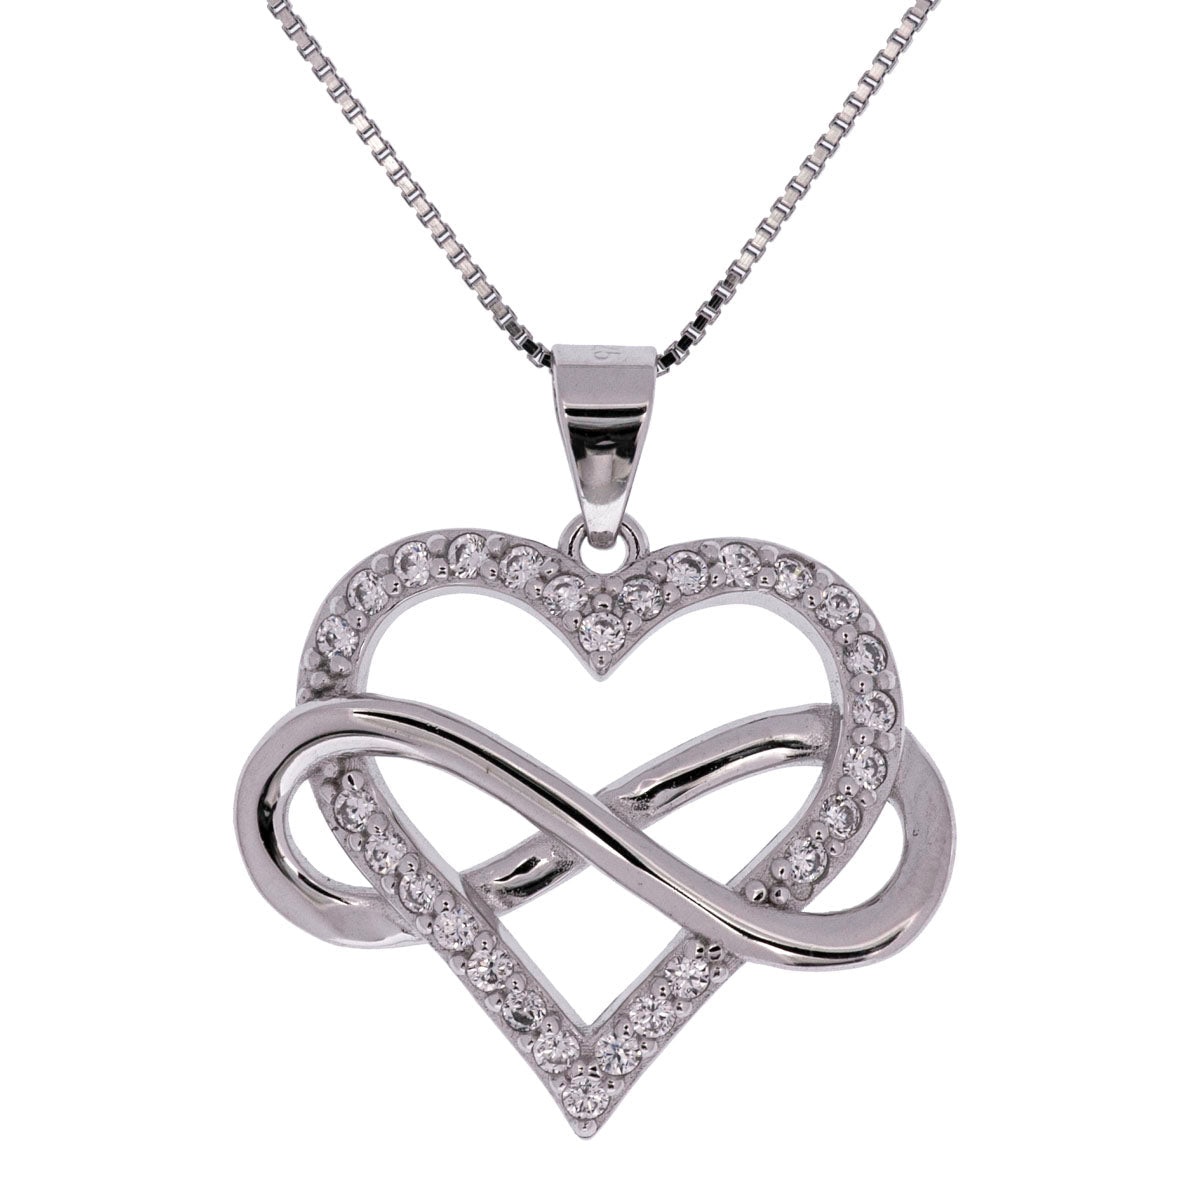 The Day I Met You Infinity Heart Silver Necklace - Wife